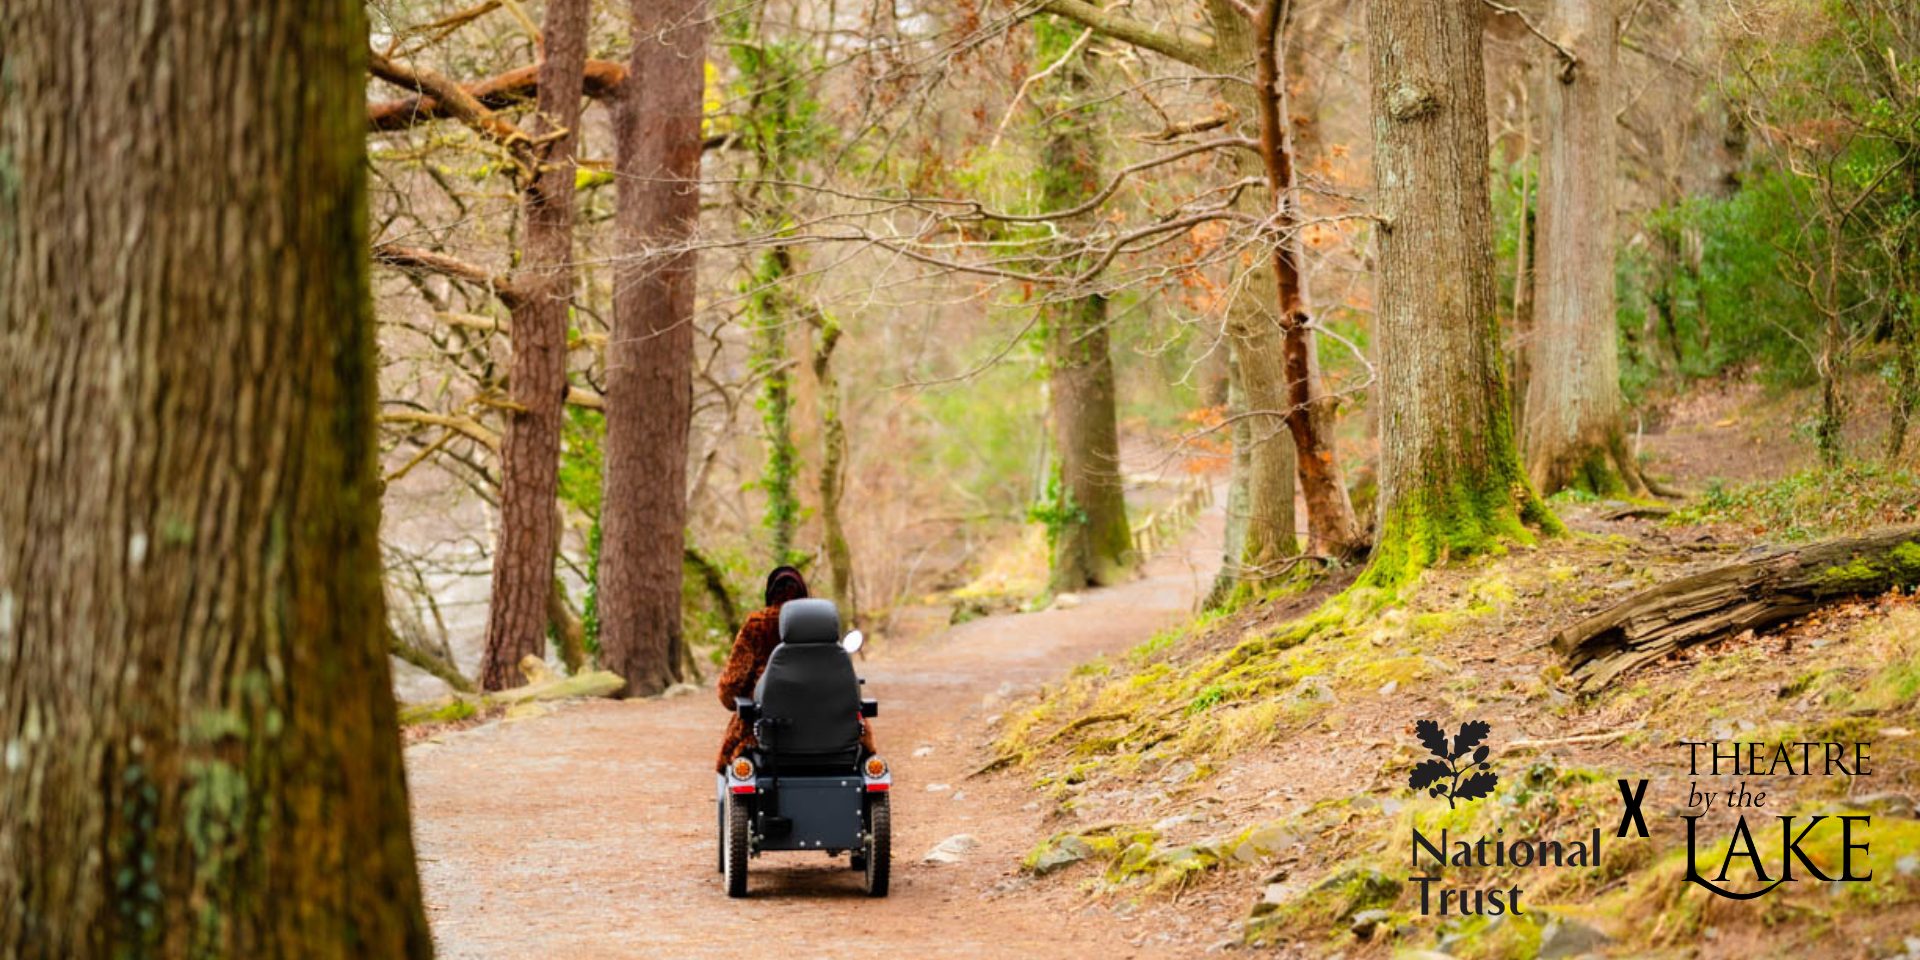 Making the great outdoors more accessible